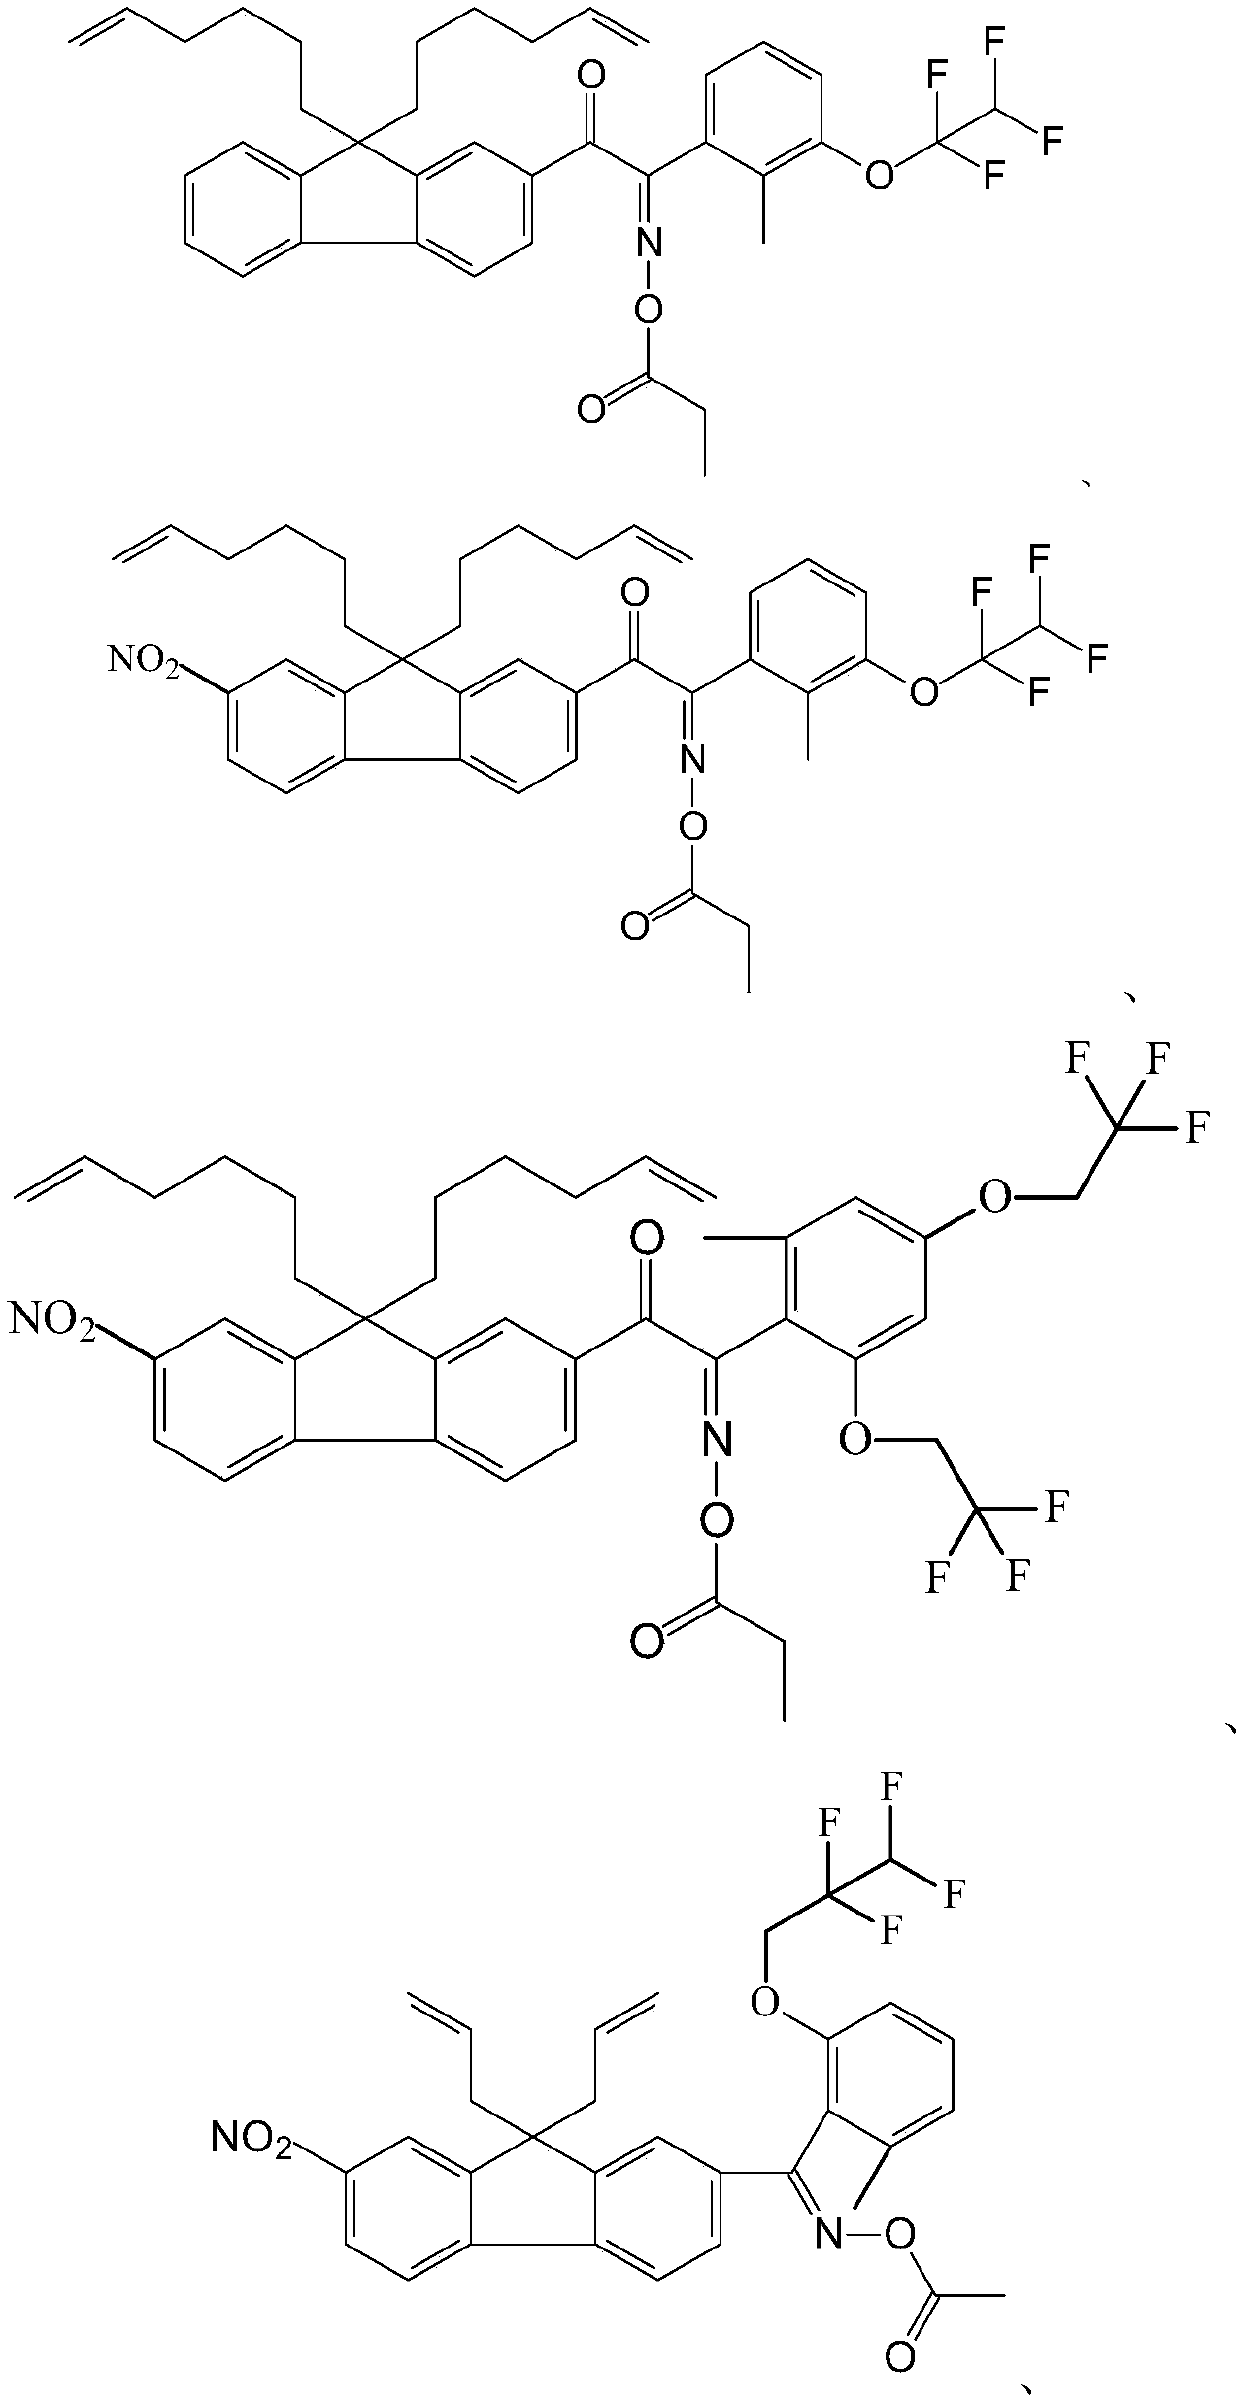 Fluoro-containing fluorene oxime ester photoinitiator, photocurable composition containing the same, and application thereof